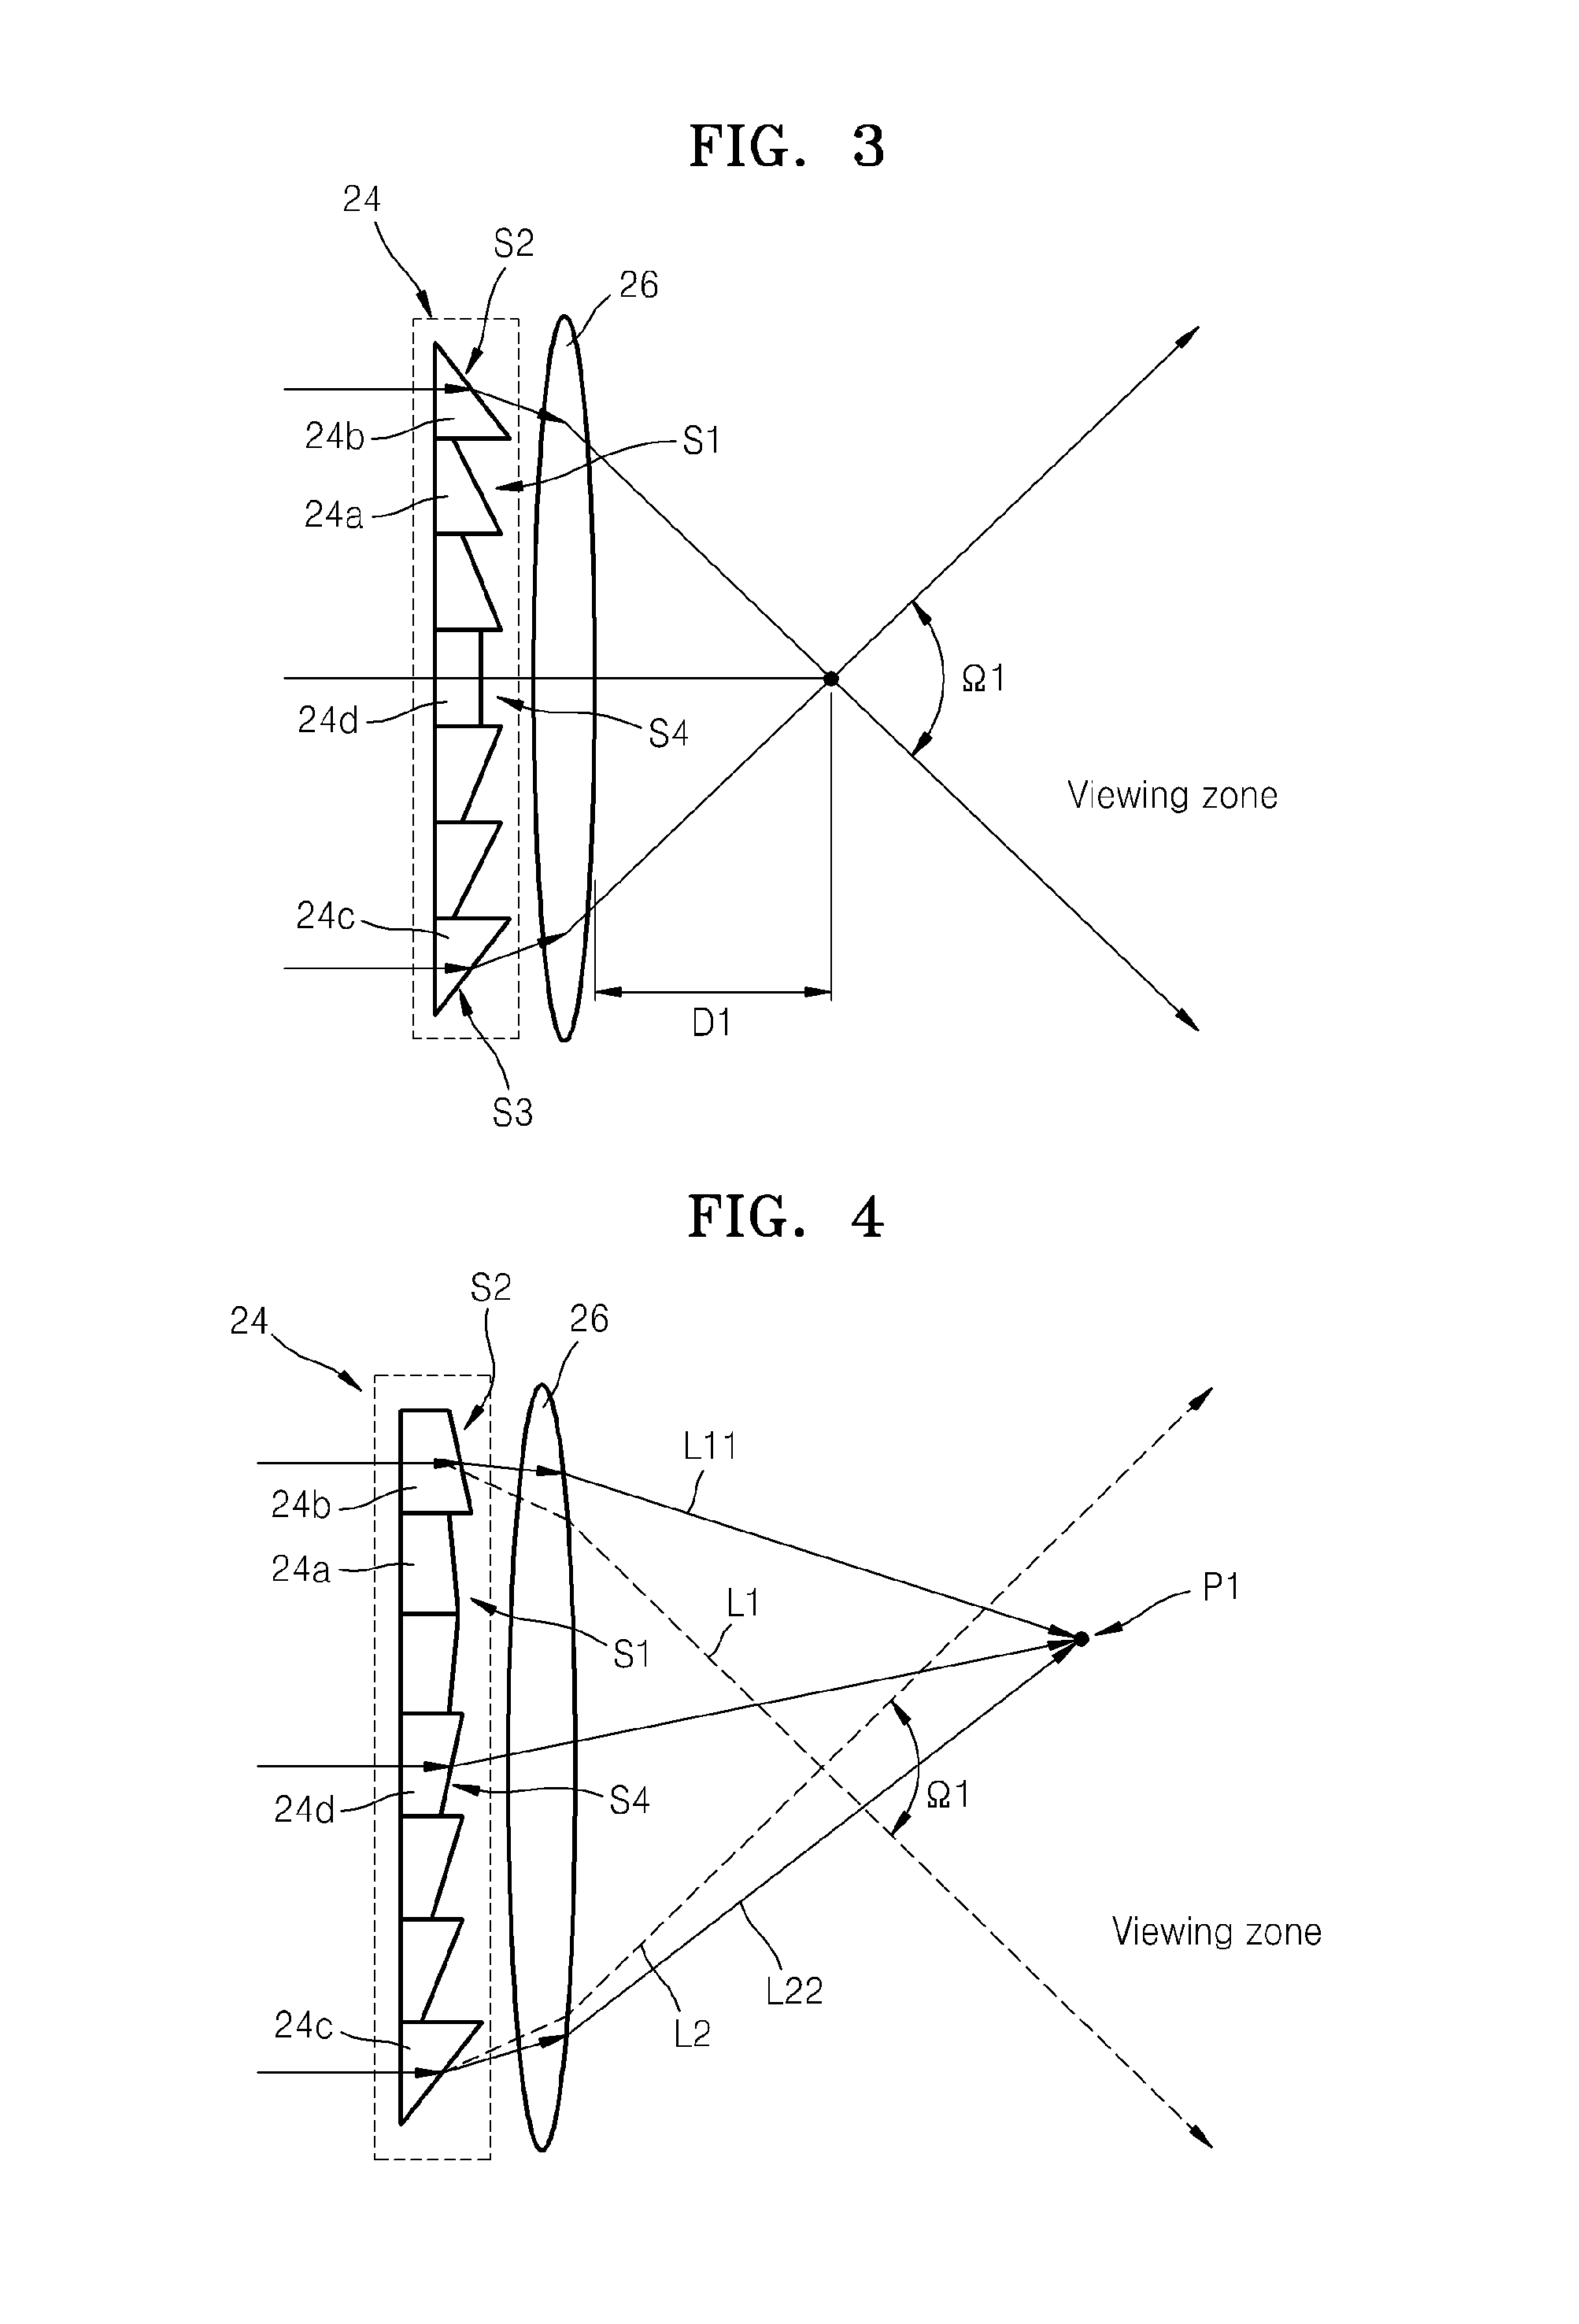 Display including electrowetting prism array